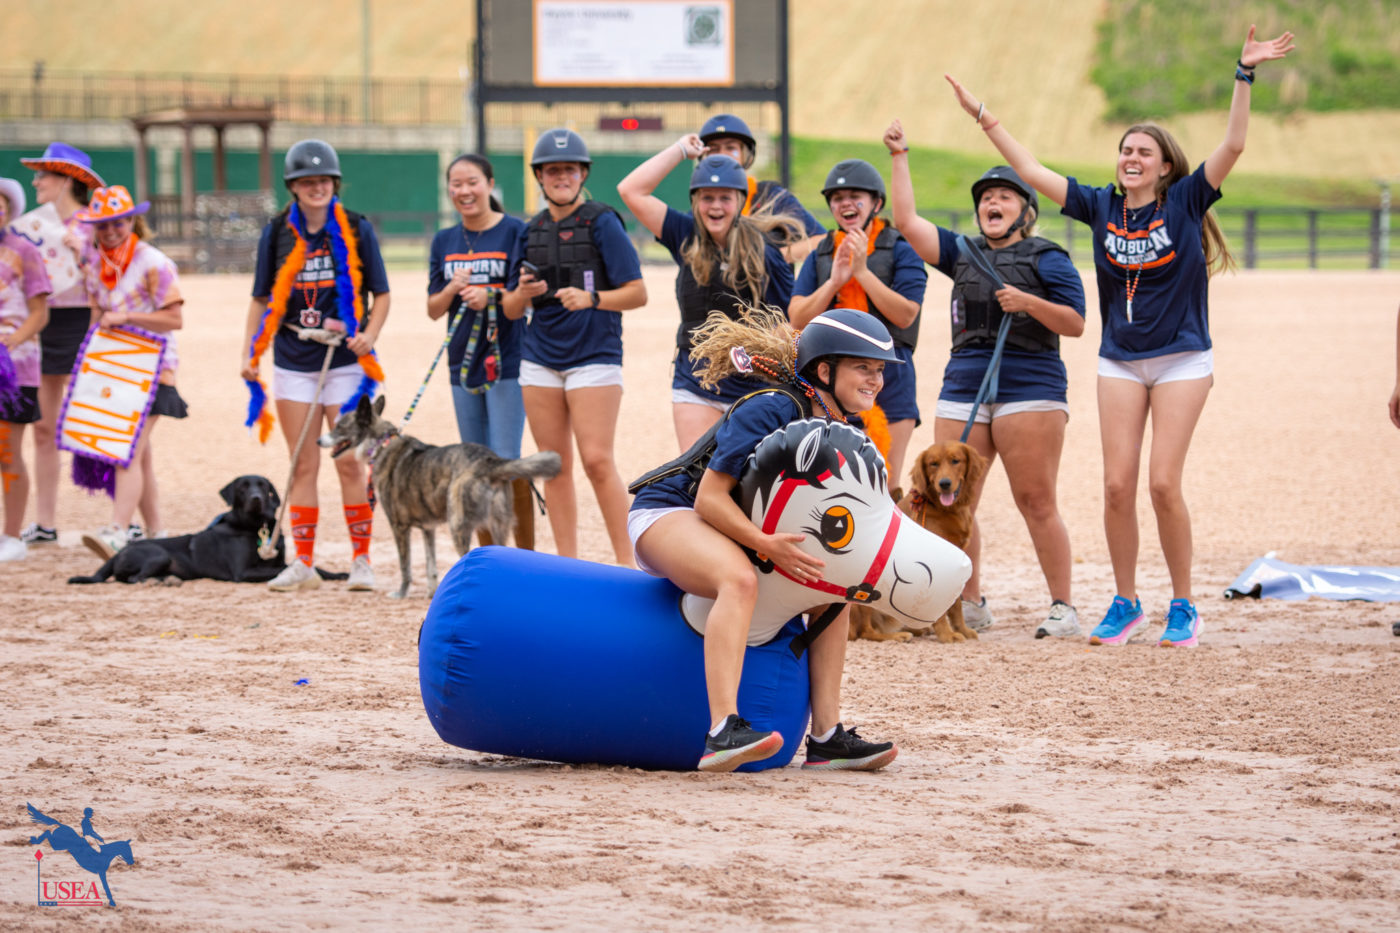 Auburn played it safe during the Bouncy Pony Relay Race Championship with their helmets and safety vests. USEA/Shelby Allen photo